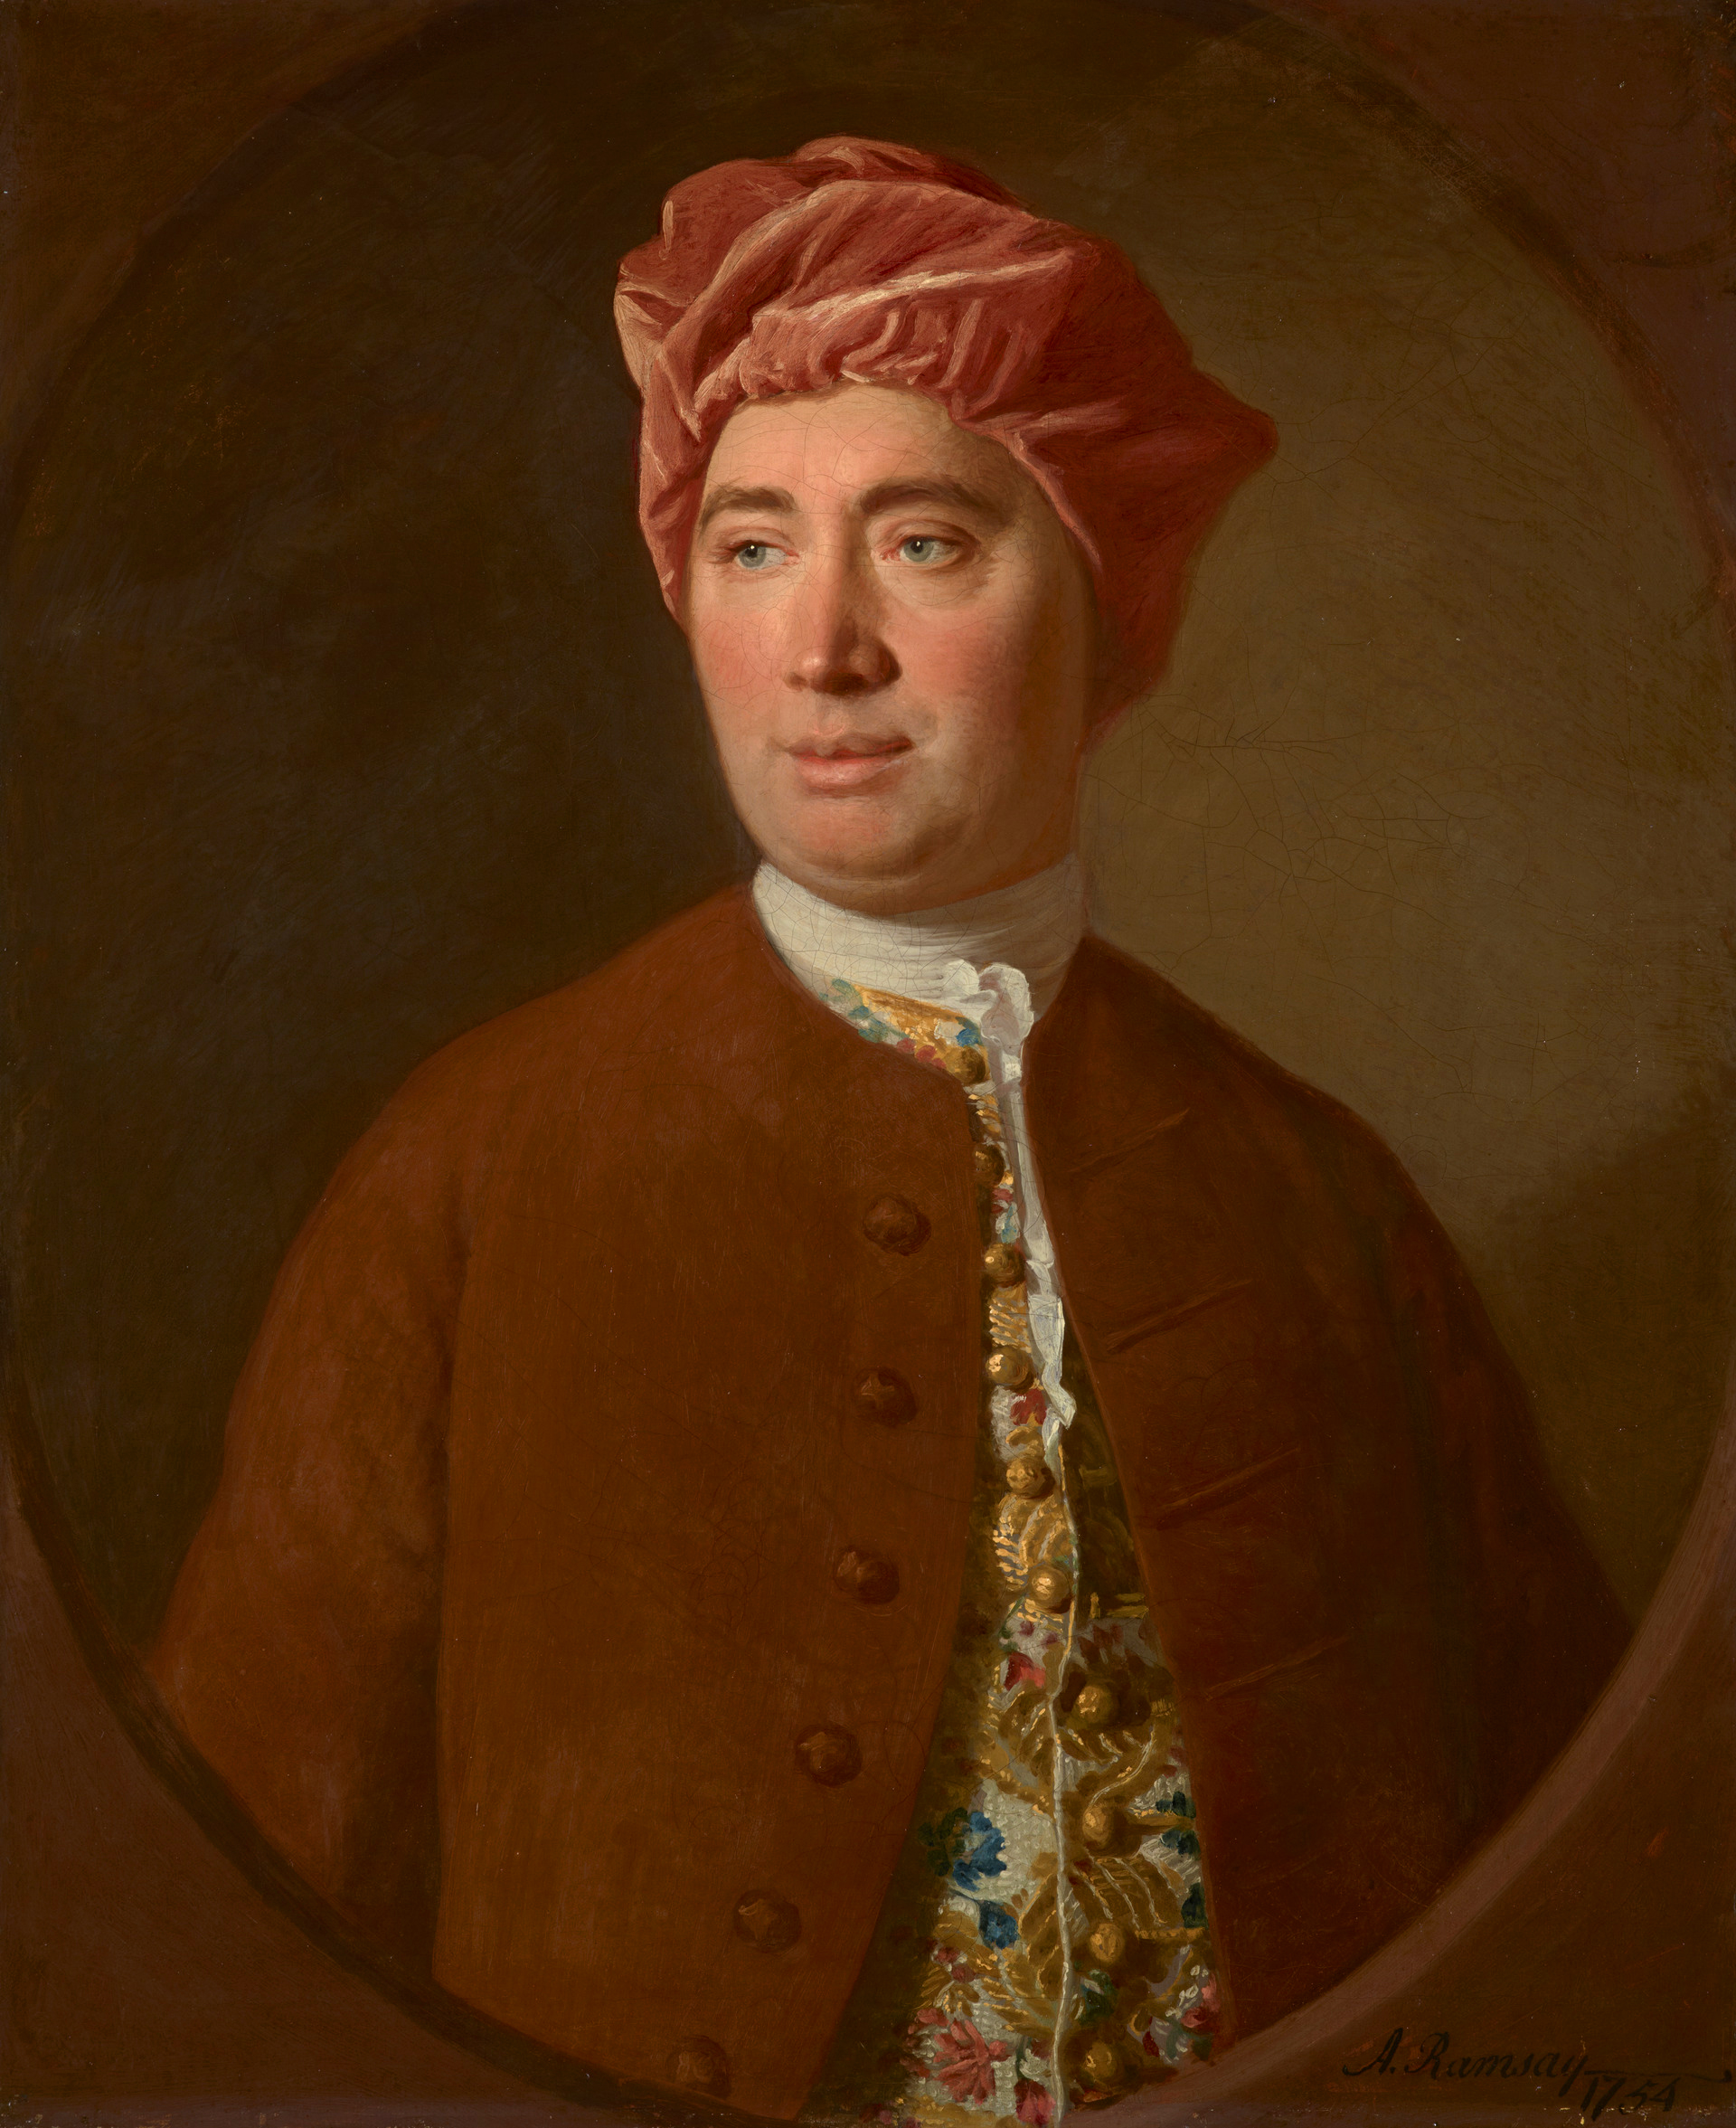 Hume in 1754